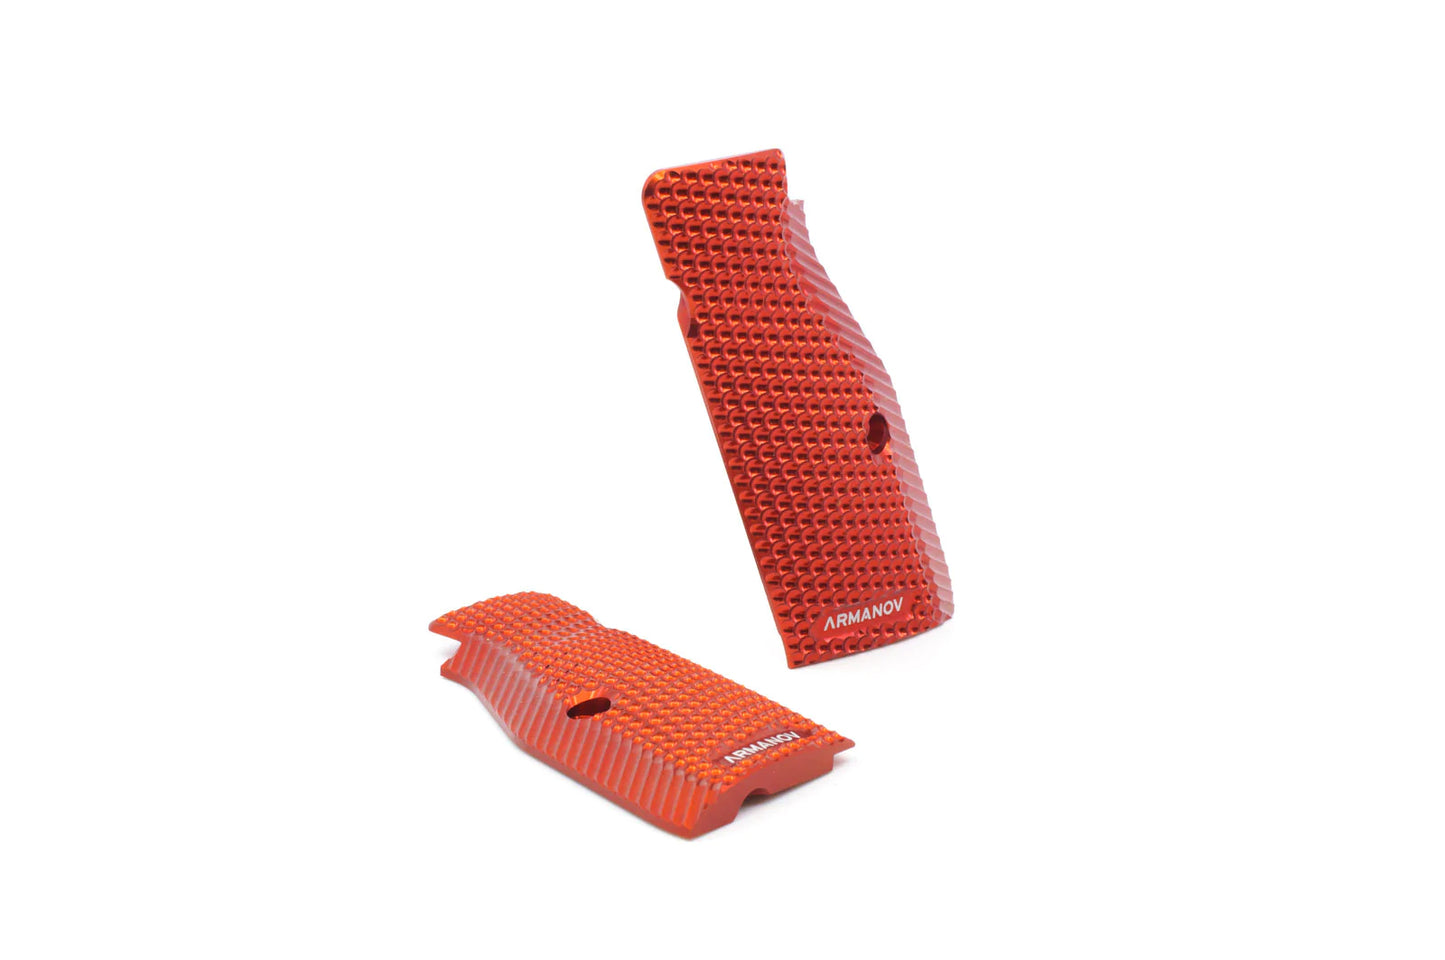 Open Box - SpidErgo Gen2 Pistol Grips for CZ Shadow 2, SP01, TS, TS2 and 75 series